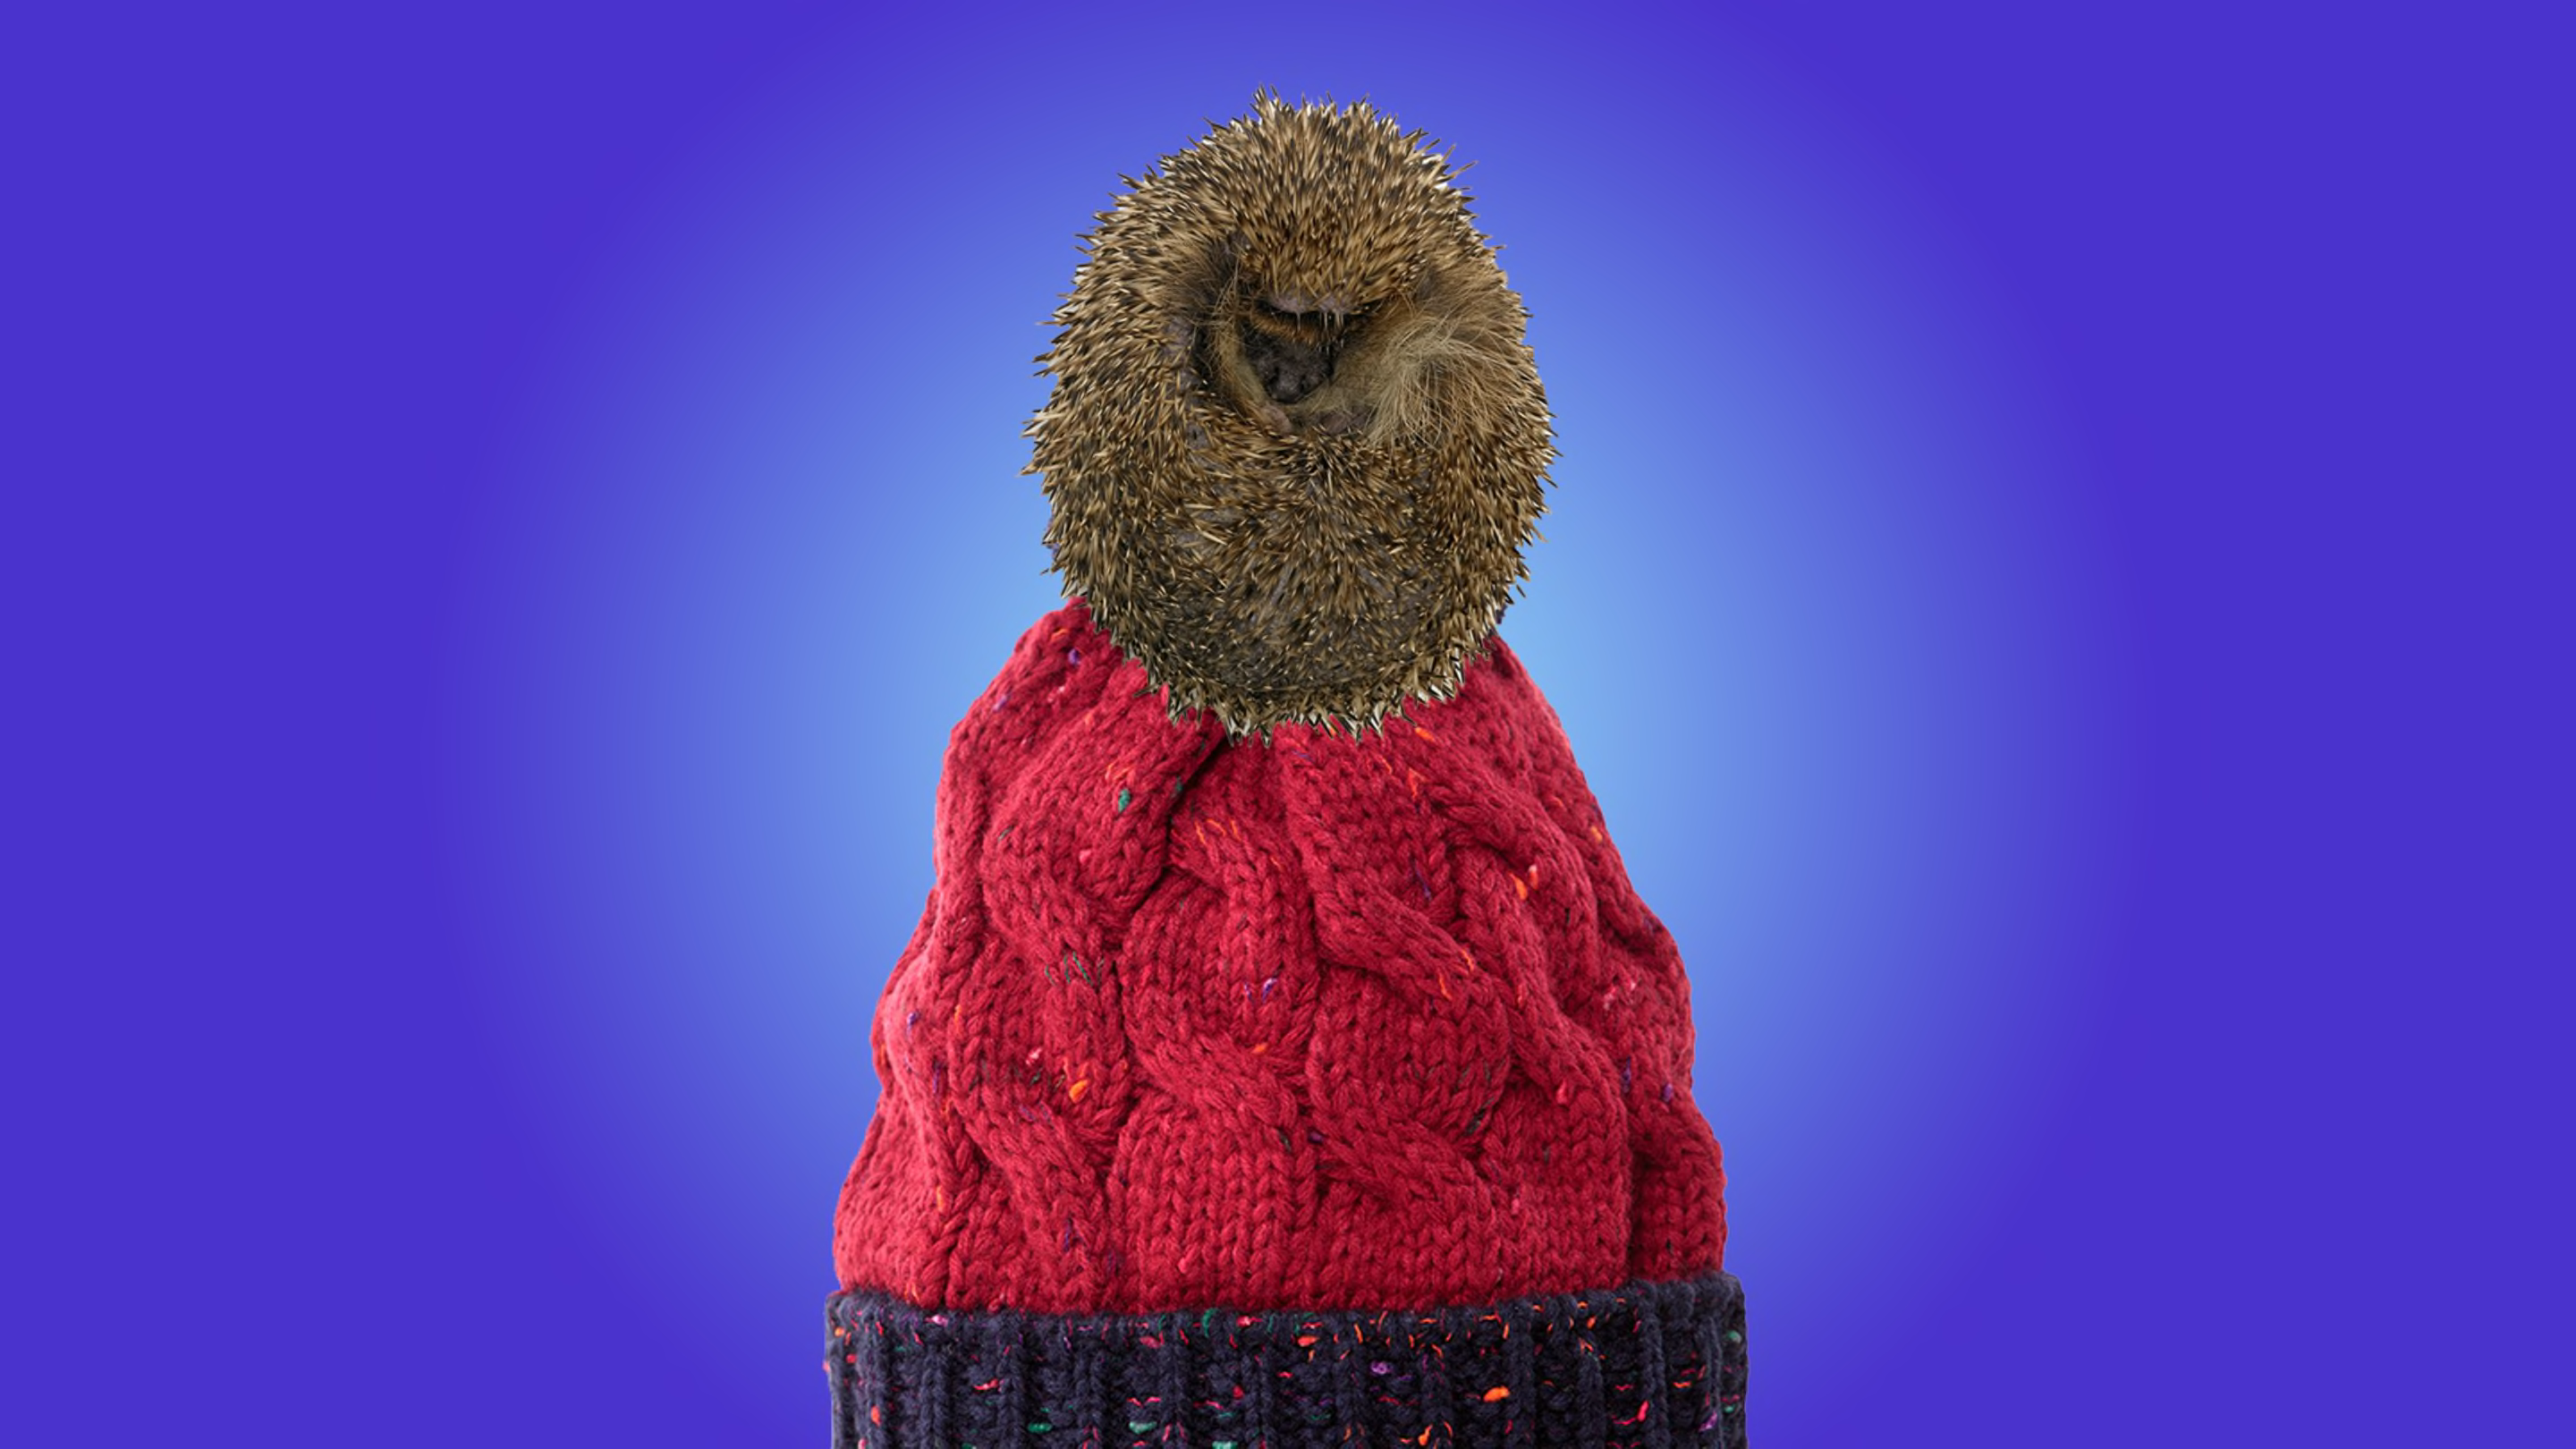 Woman Rescues Baby Hedgehog, Realizes It’s a Hat Pom-Pom